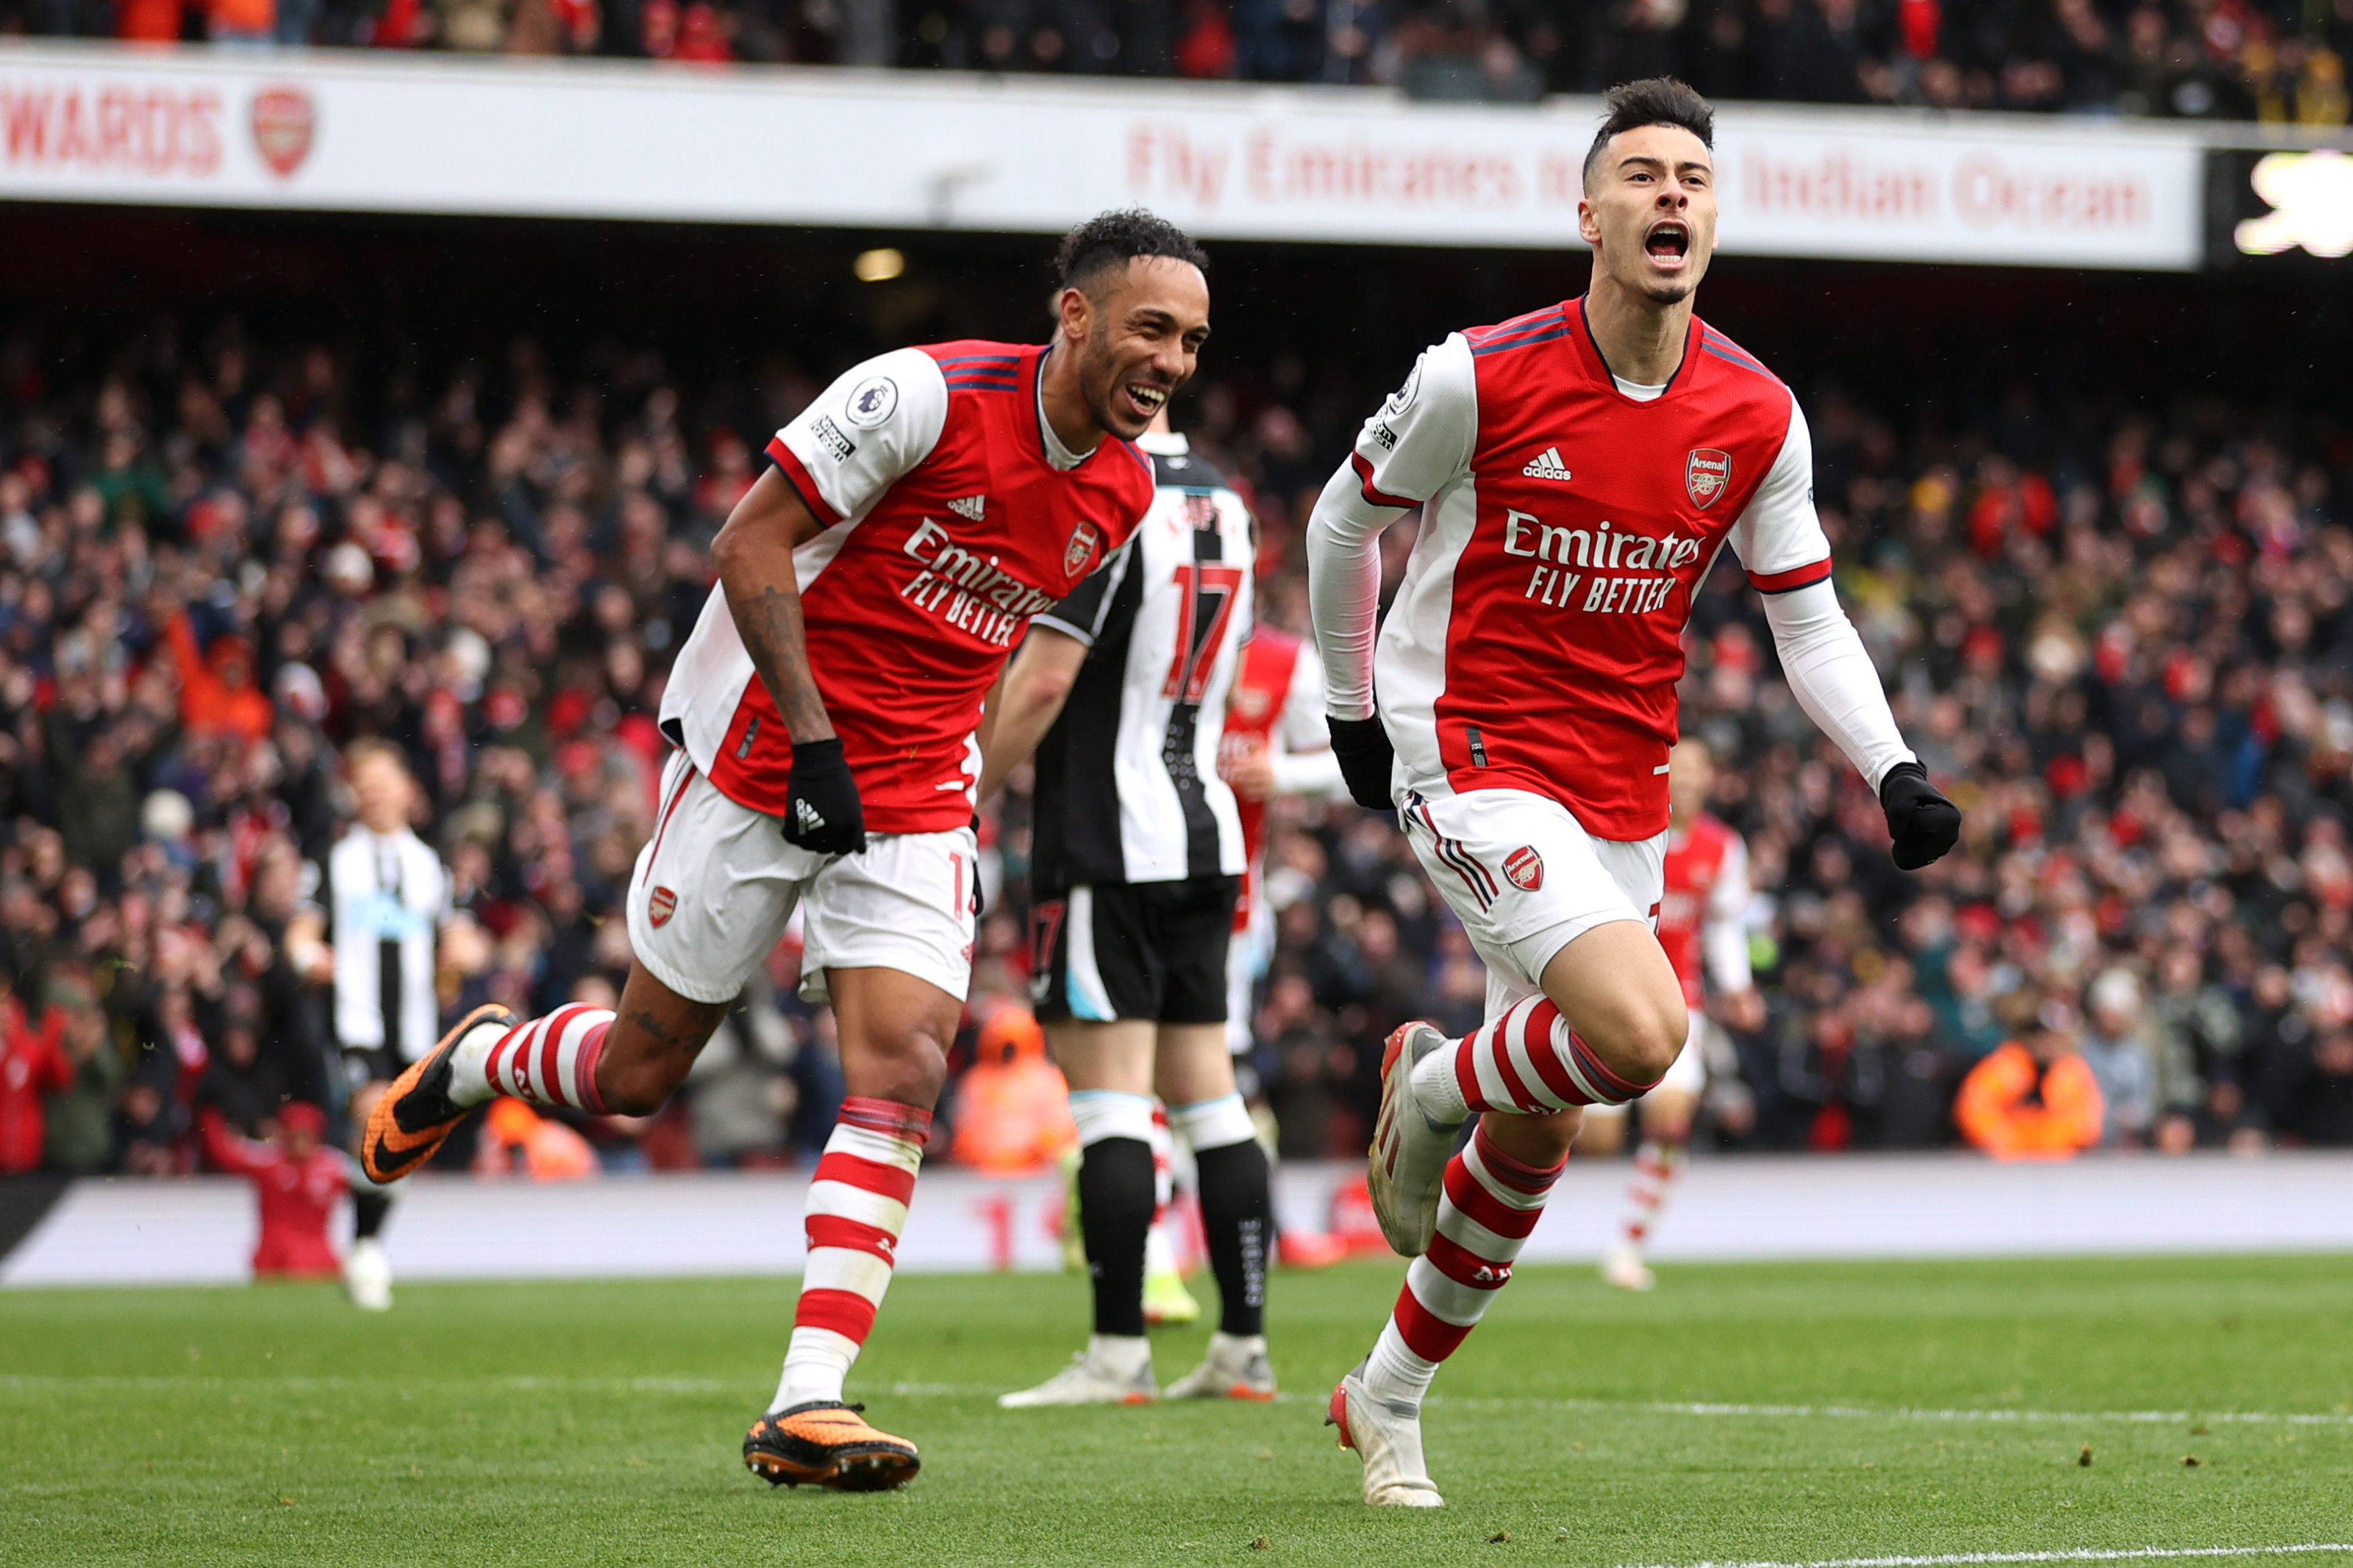 Arsenal predicted lineup vs Everton Auba dropped and Martinelli in?